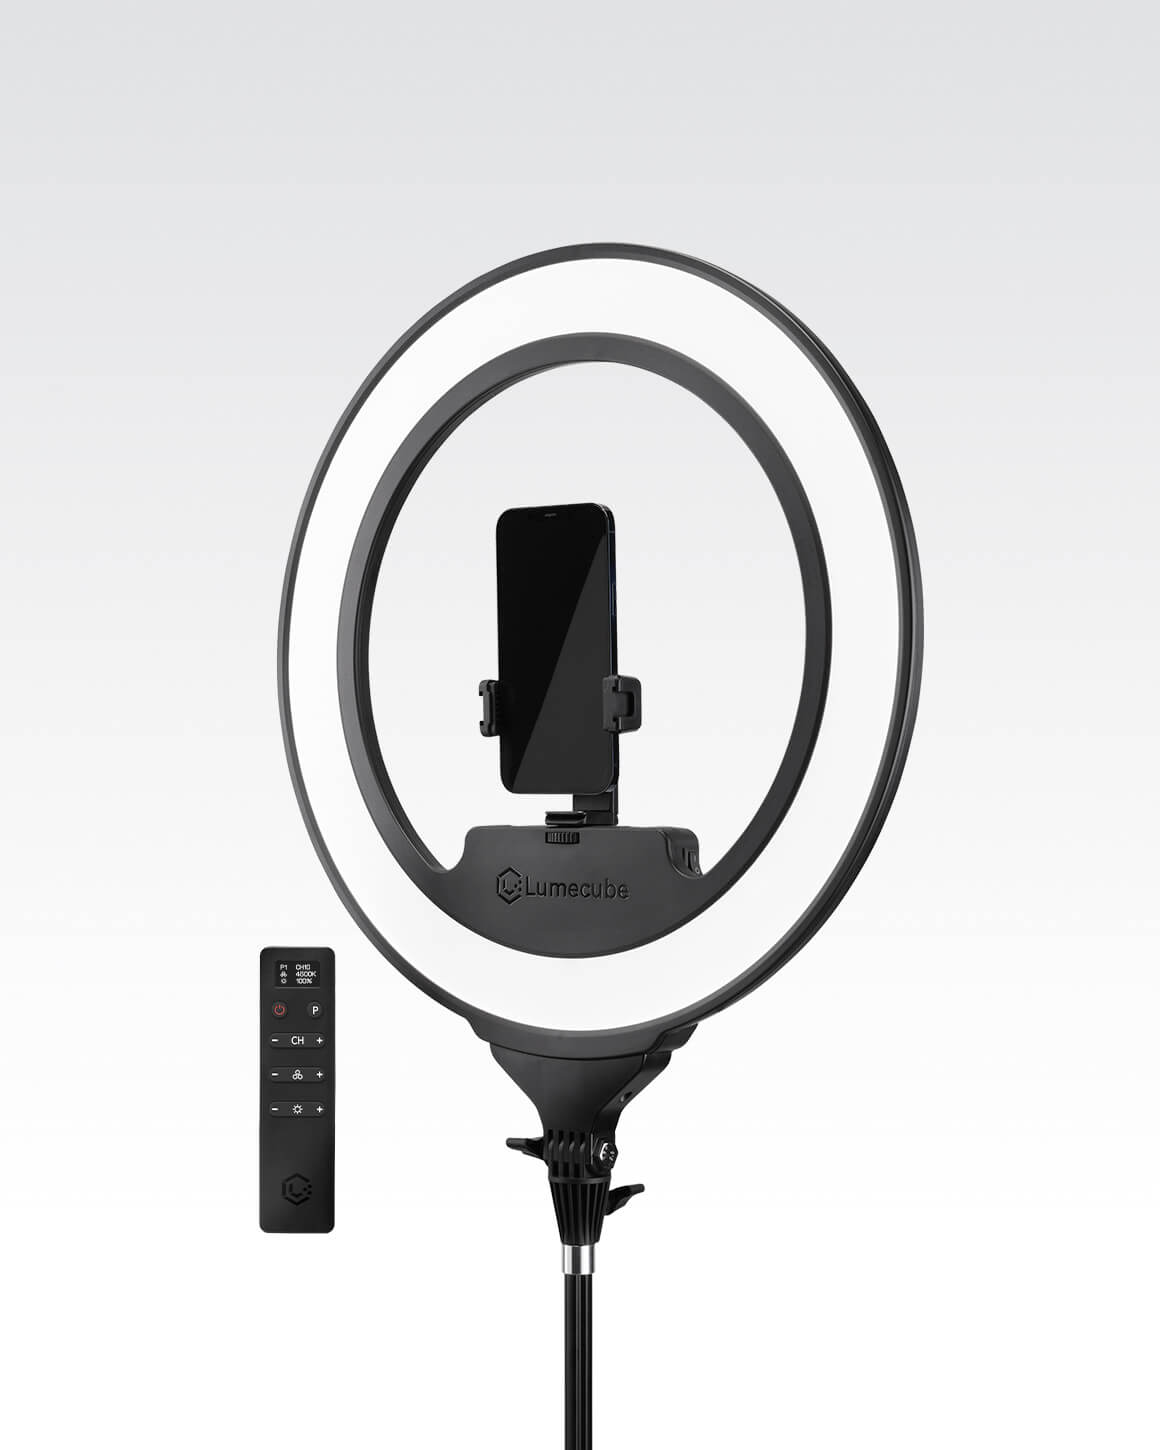 Cordless LED Ring Light Pro with a smartphone mount and wireless remote control.